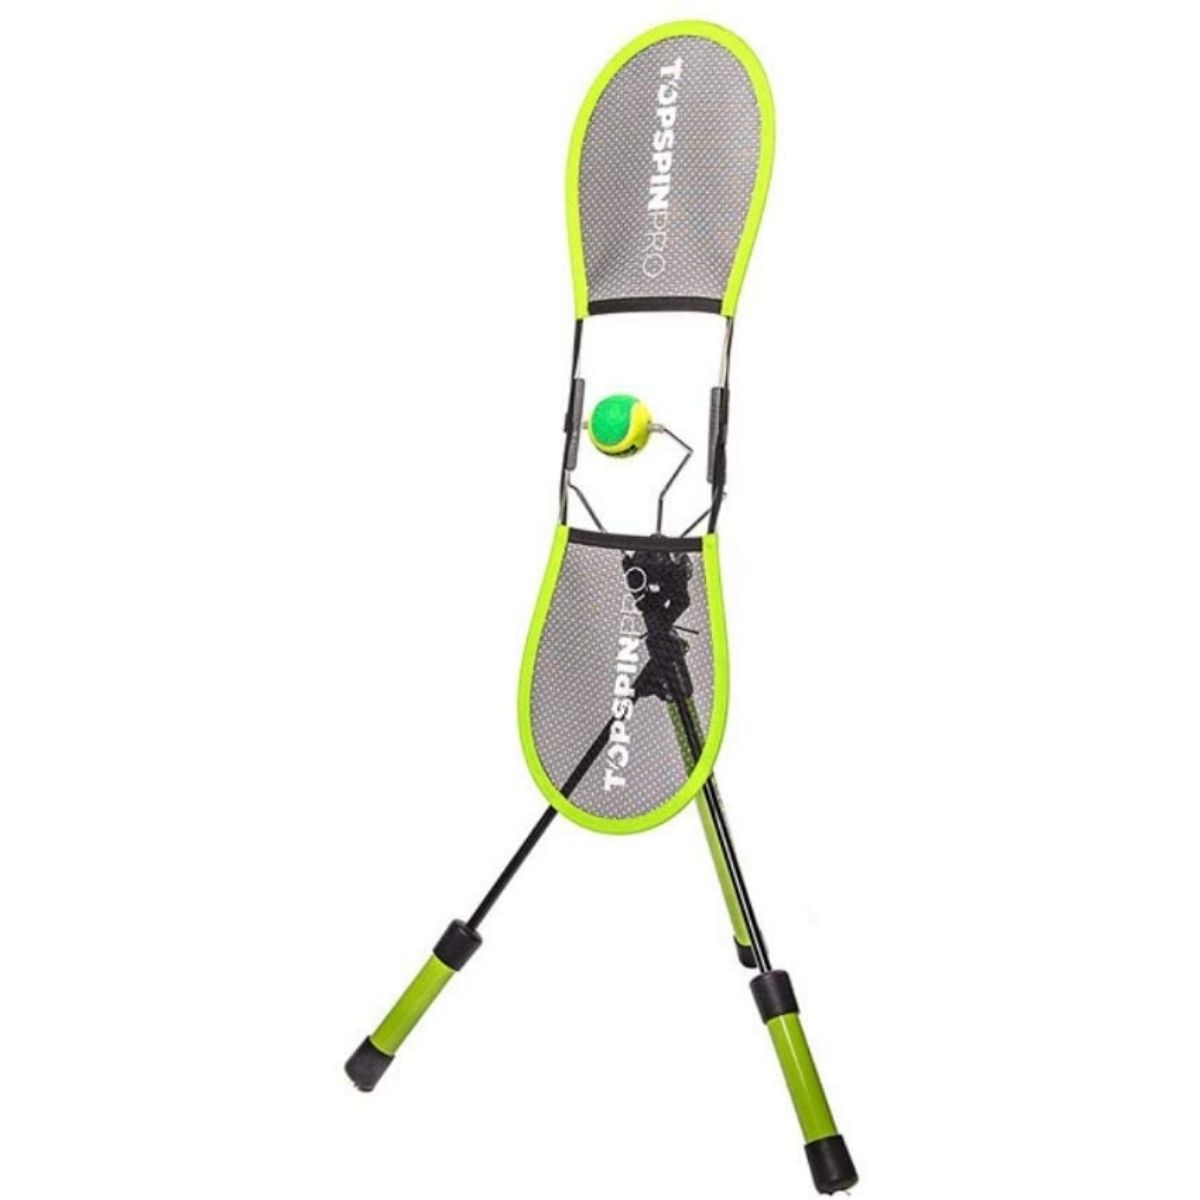 How to Practice Tennis Alone using Topspin pro training aid